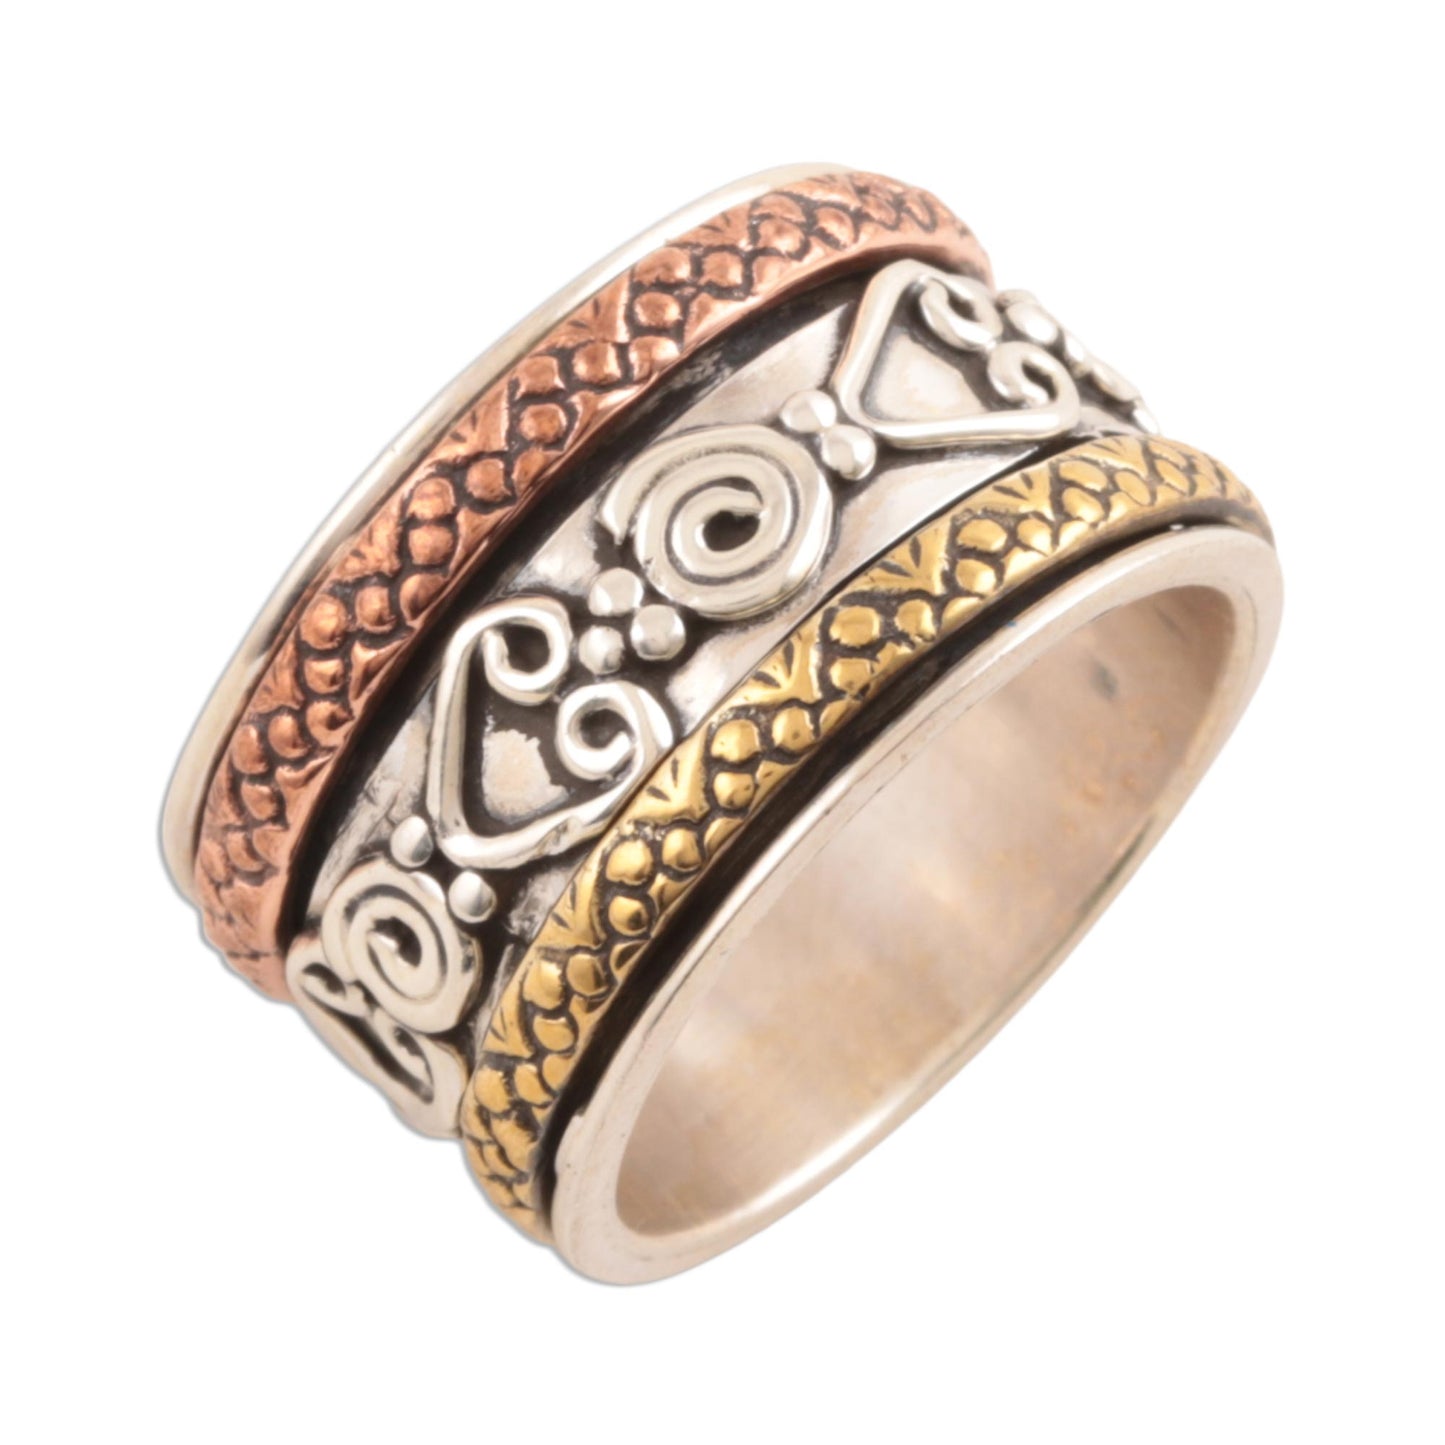 Creative Hearts Heart Pattern Sterling Silver Spinner Ring Crafted in India